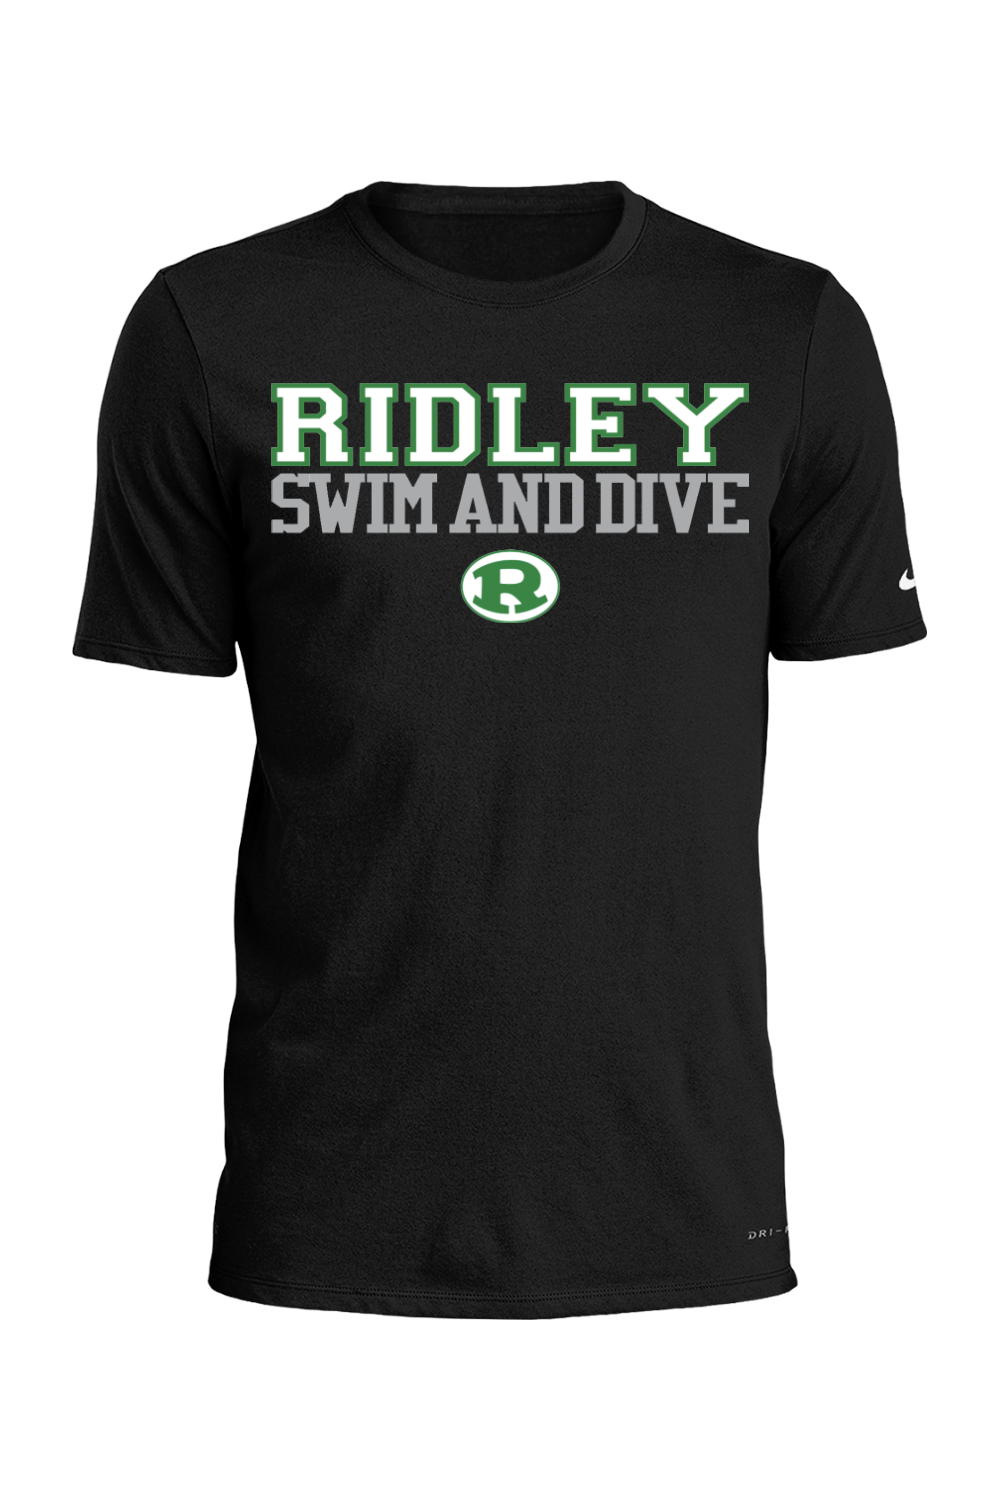 Ridley Swim and Dive Nike Dri-FIT Cotton/Poly Tee